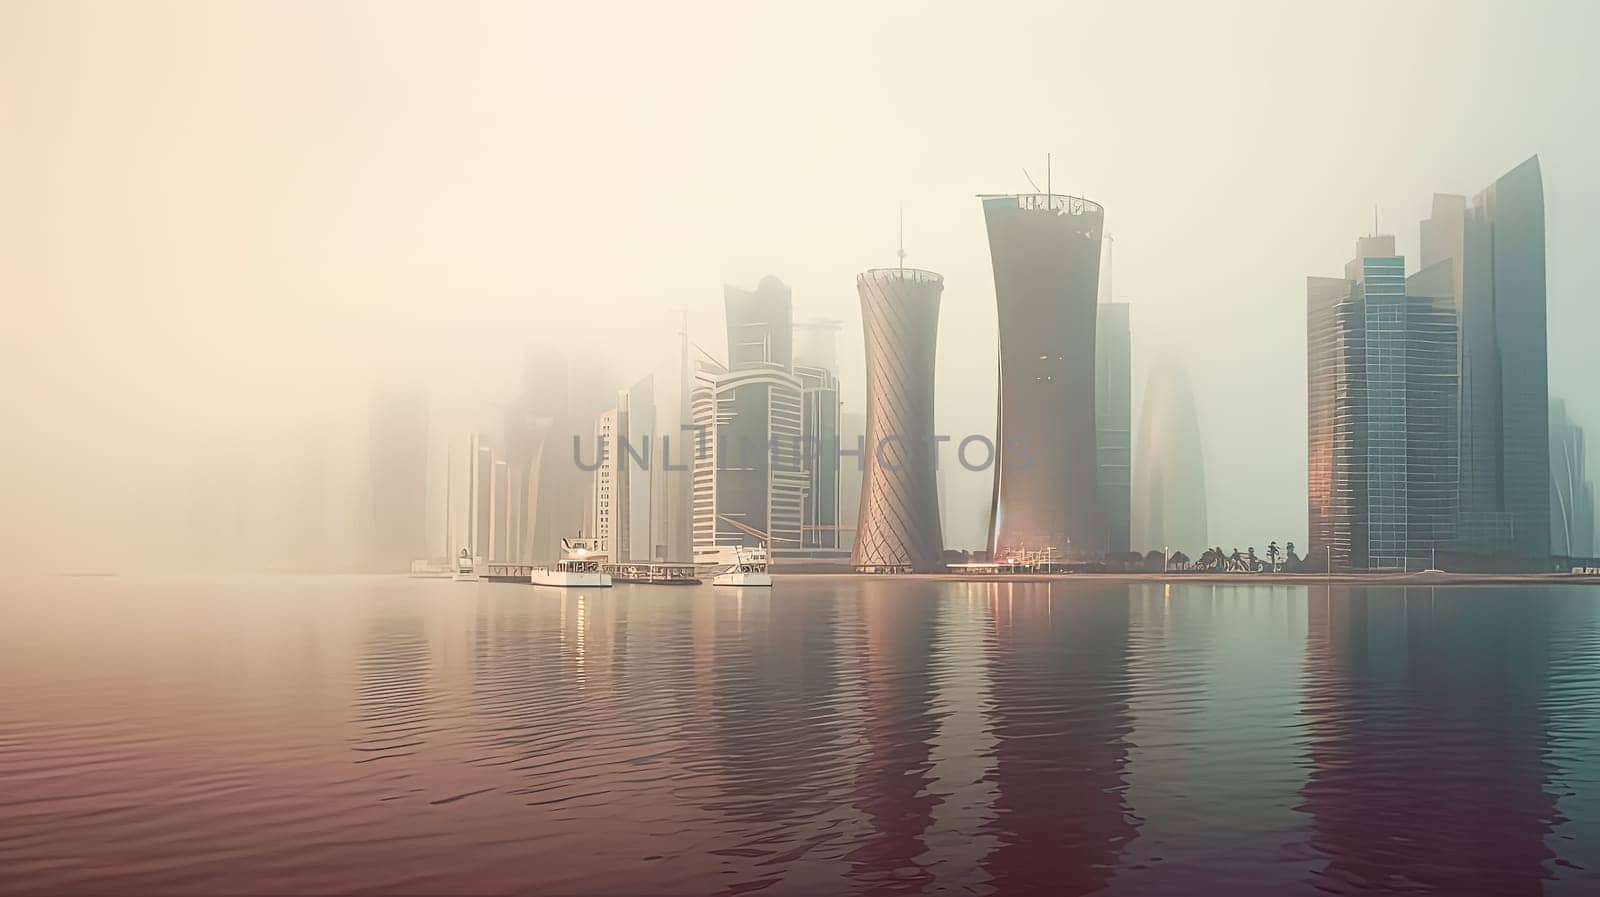 A city skyline with a large body of water in the background. The water is calm and the sky is overcast